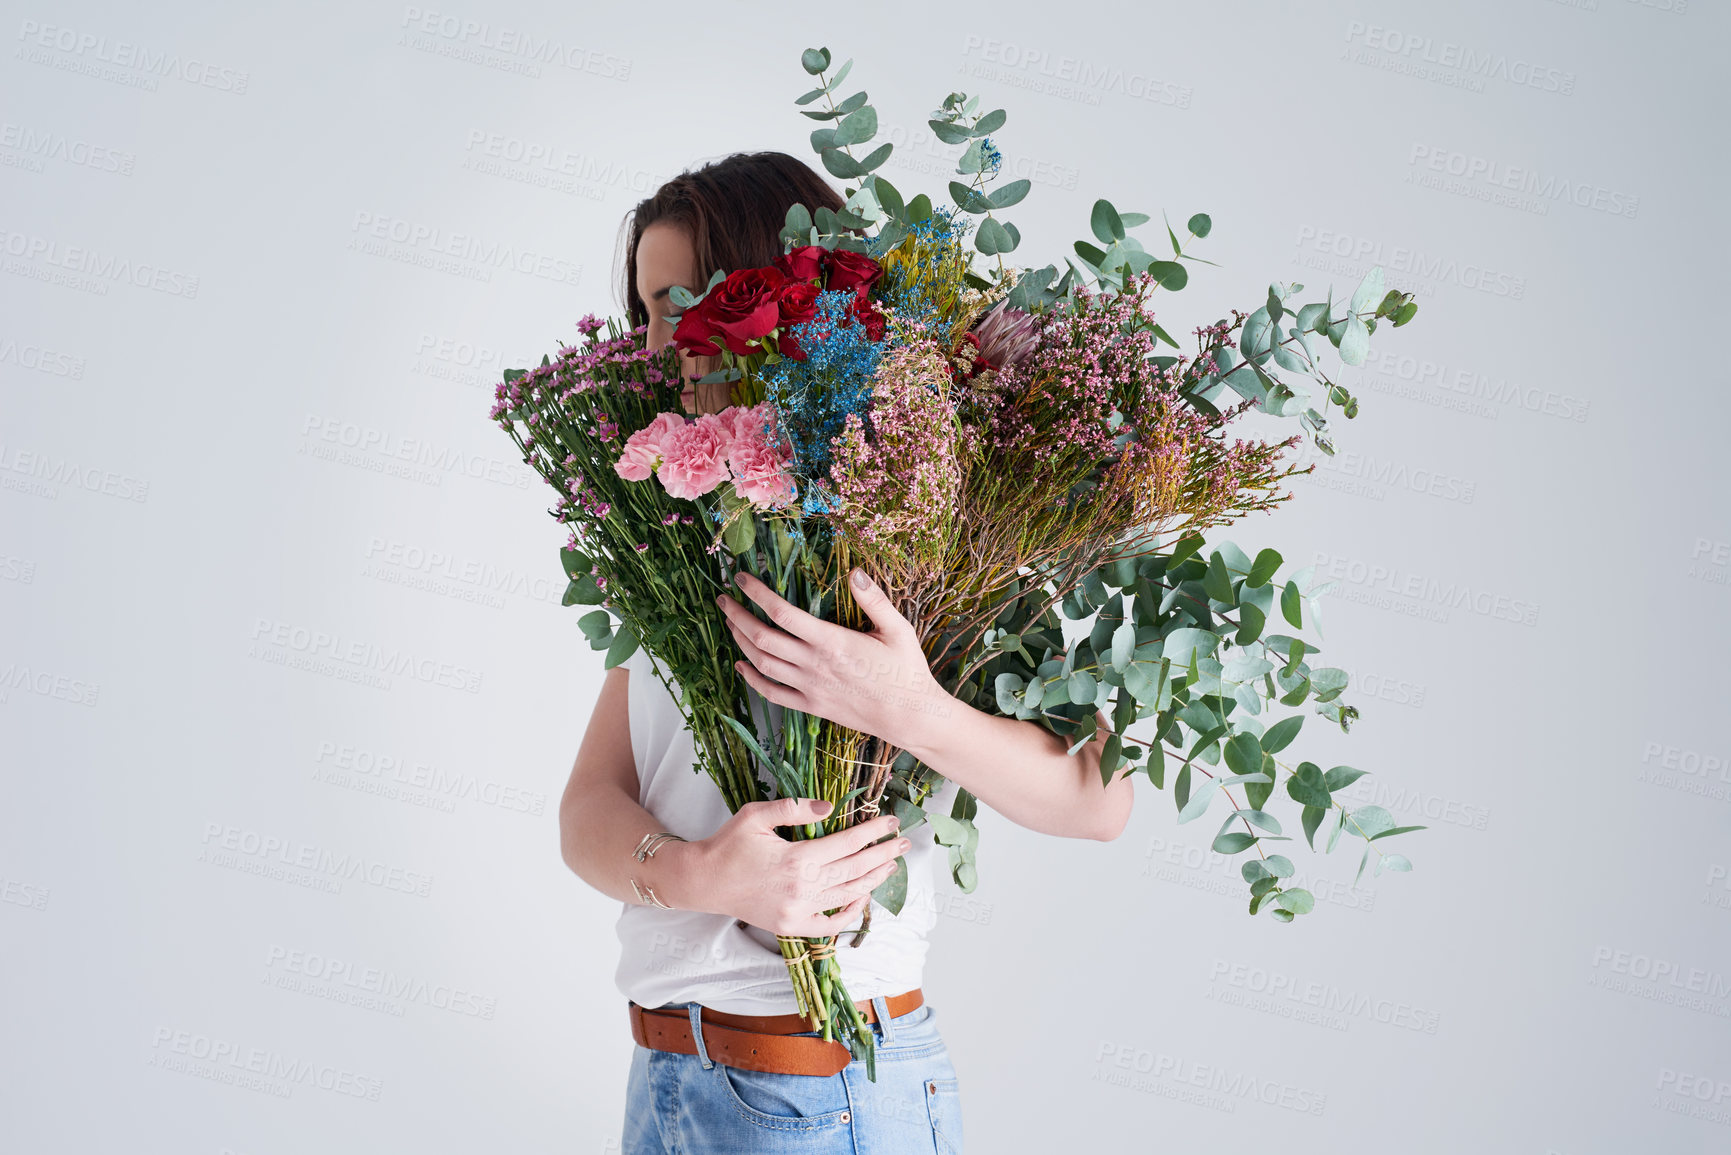 Buy stock photo Nature, hide face and woman with flowers, bouquet or present against a grey background. Female person, model or girl with a floral present, creative aesthetics or natural products with sustainability